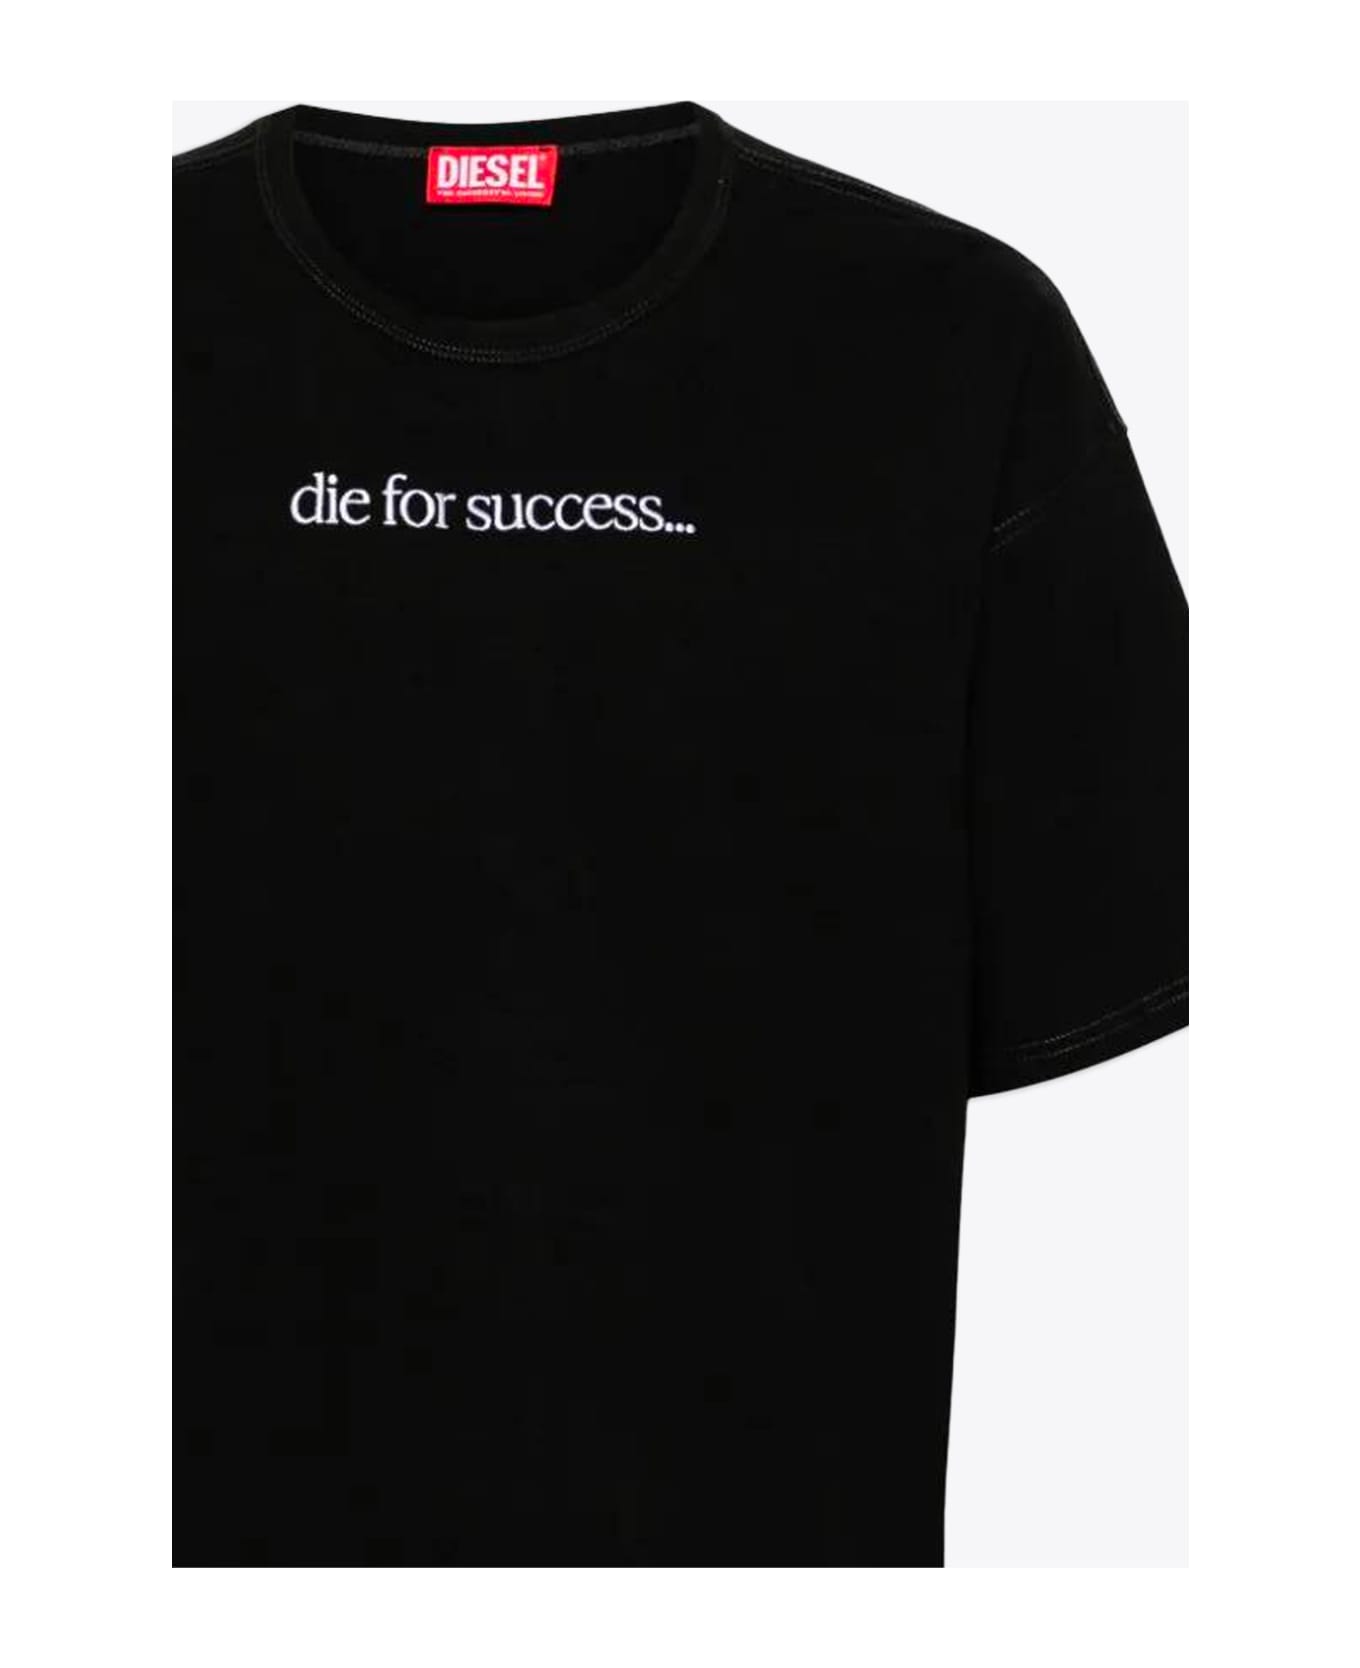 Diesel 0nfae T-box-n6 Black cotton t-shirt with front slogan embroidery - T Boxt N6 - Nero